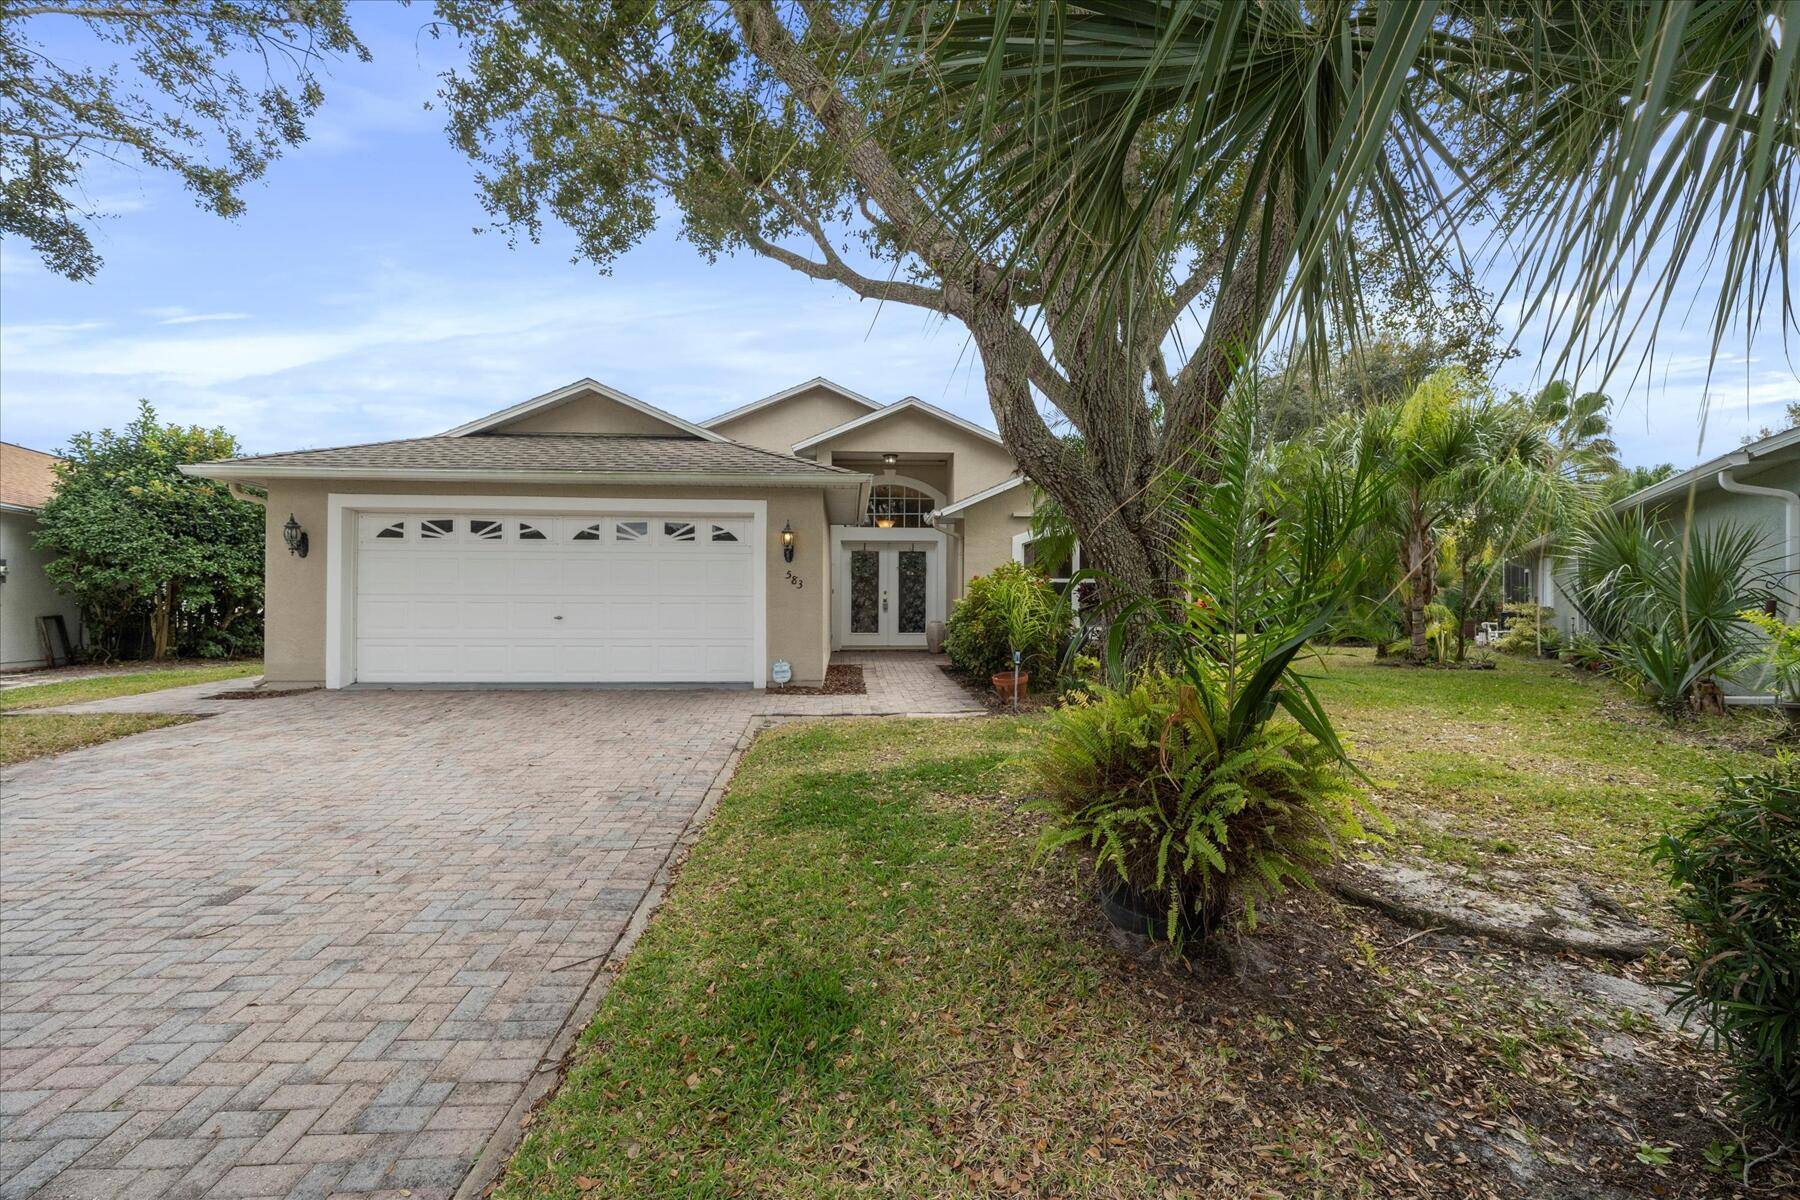 Located in the exclusive gated community of Collier Club features this impeccably maintained, solidly constructed CBS home, boasting a thoughtfully designed split bedroom layout, seamlessly flowing open concept living, dining, ...